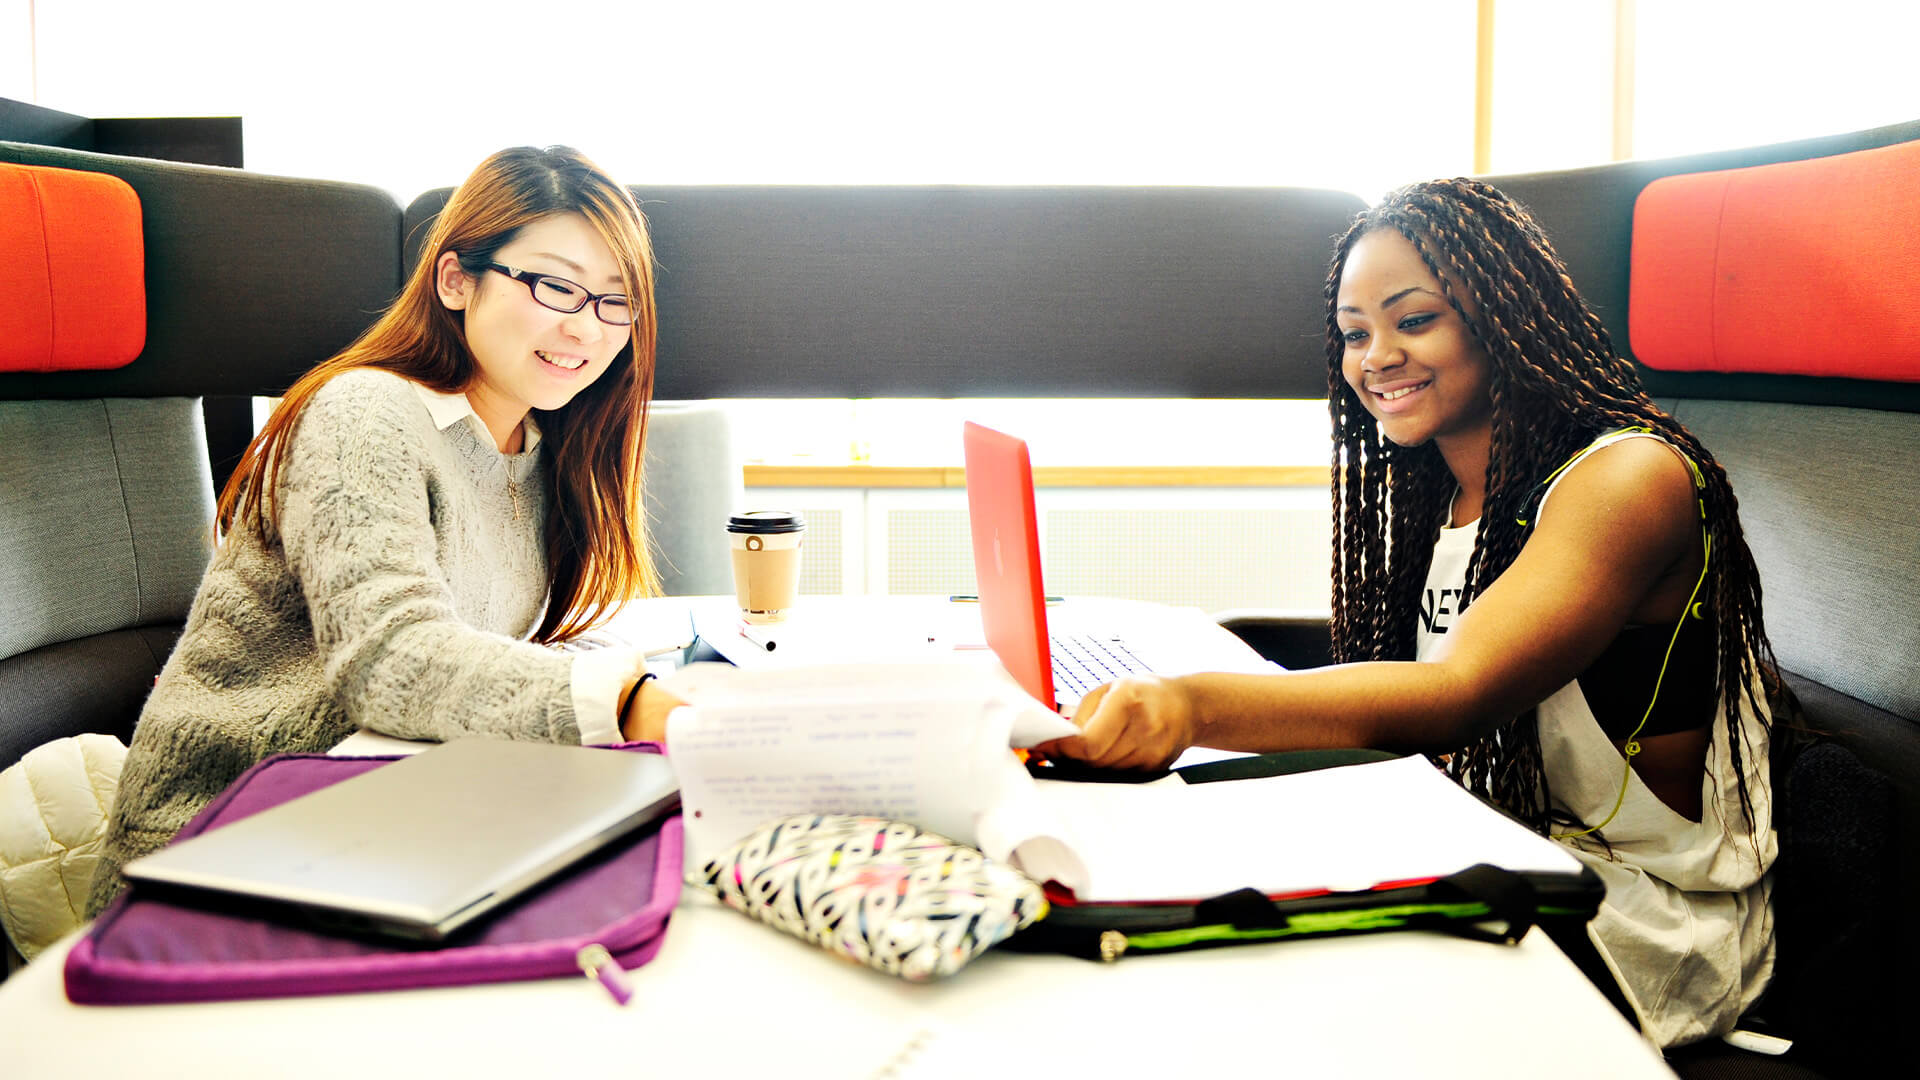 Students studying in a breakout area on-campus at the University of Manchester